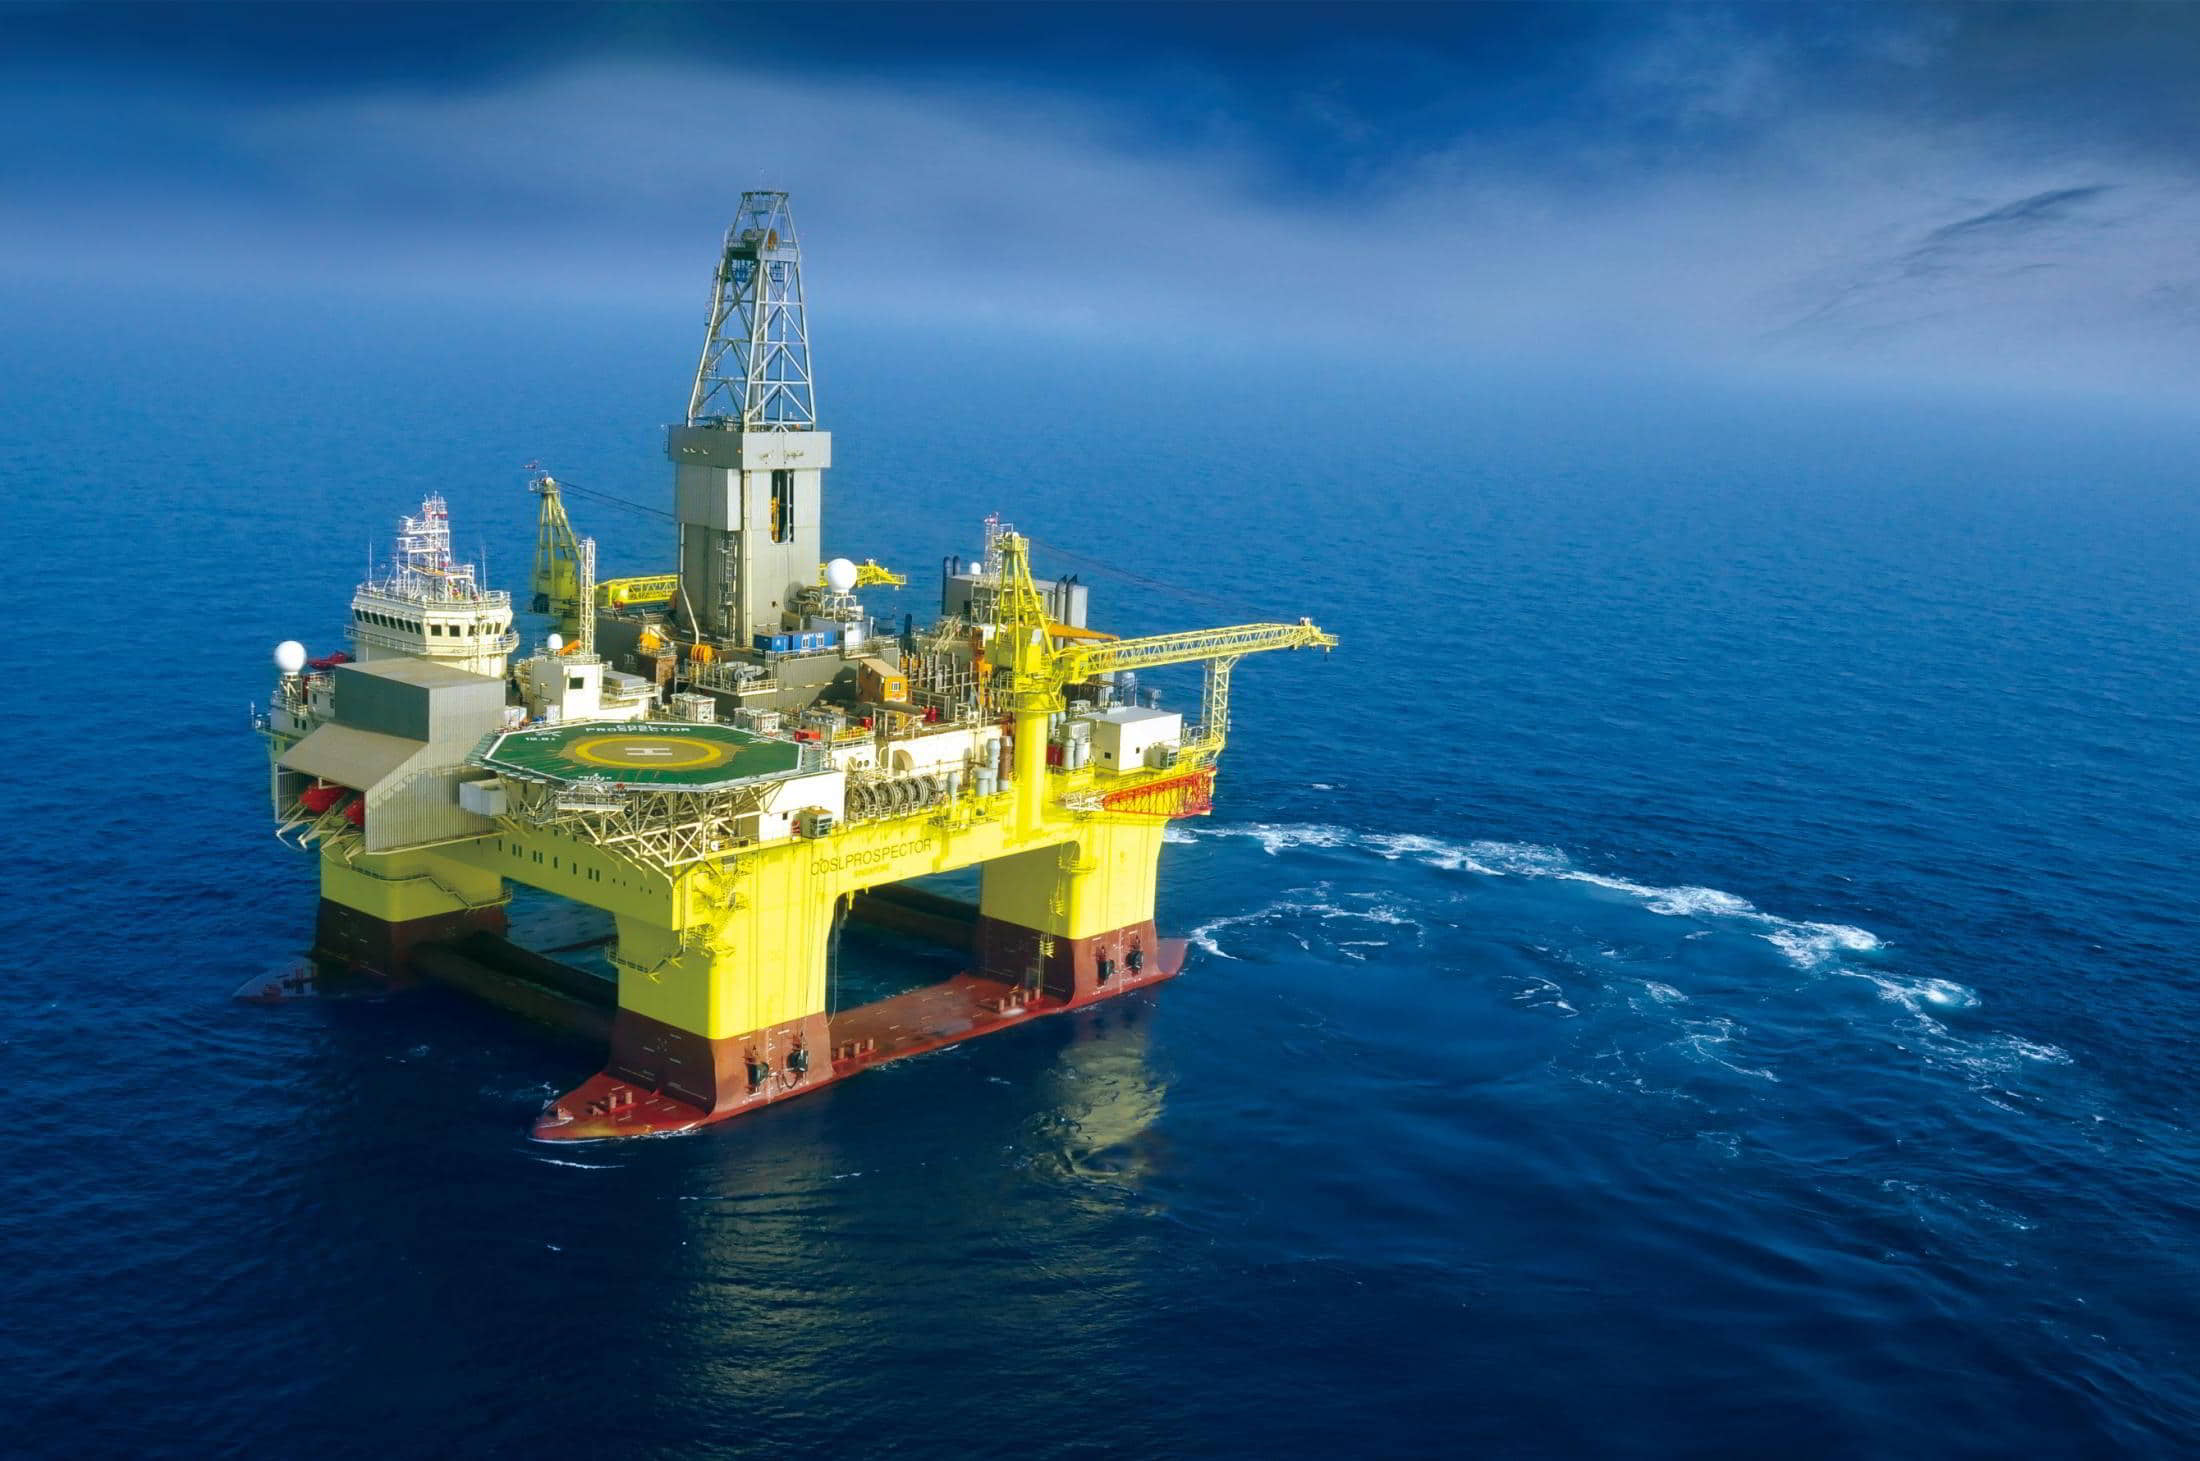 New drilling rig deals in Middle East bring <p><strong>Offshore drilling contractor China Oilfield Services Limited (COSL) has been awarded multiple contracts for the provision of drilling rig services by an undisclosed oil company</strong> <strong>in the Middle East.</strong></p>.9 bln to COSL